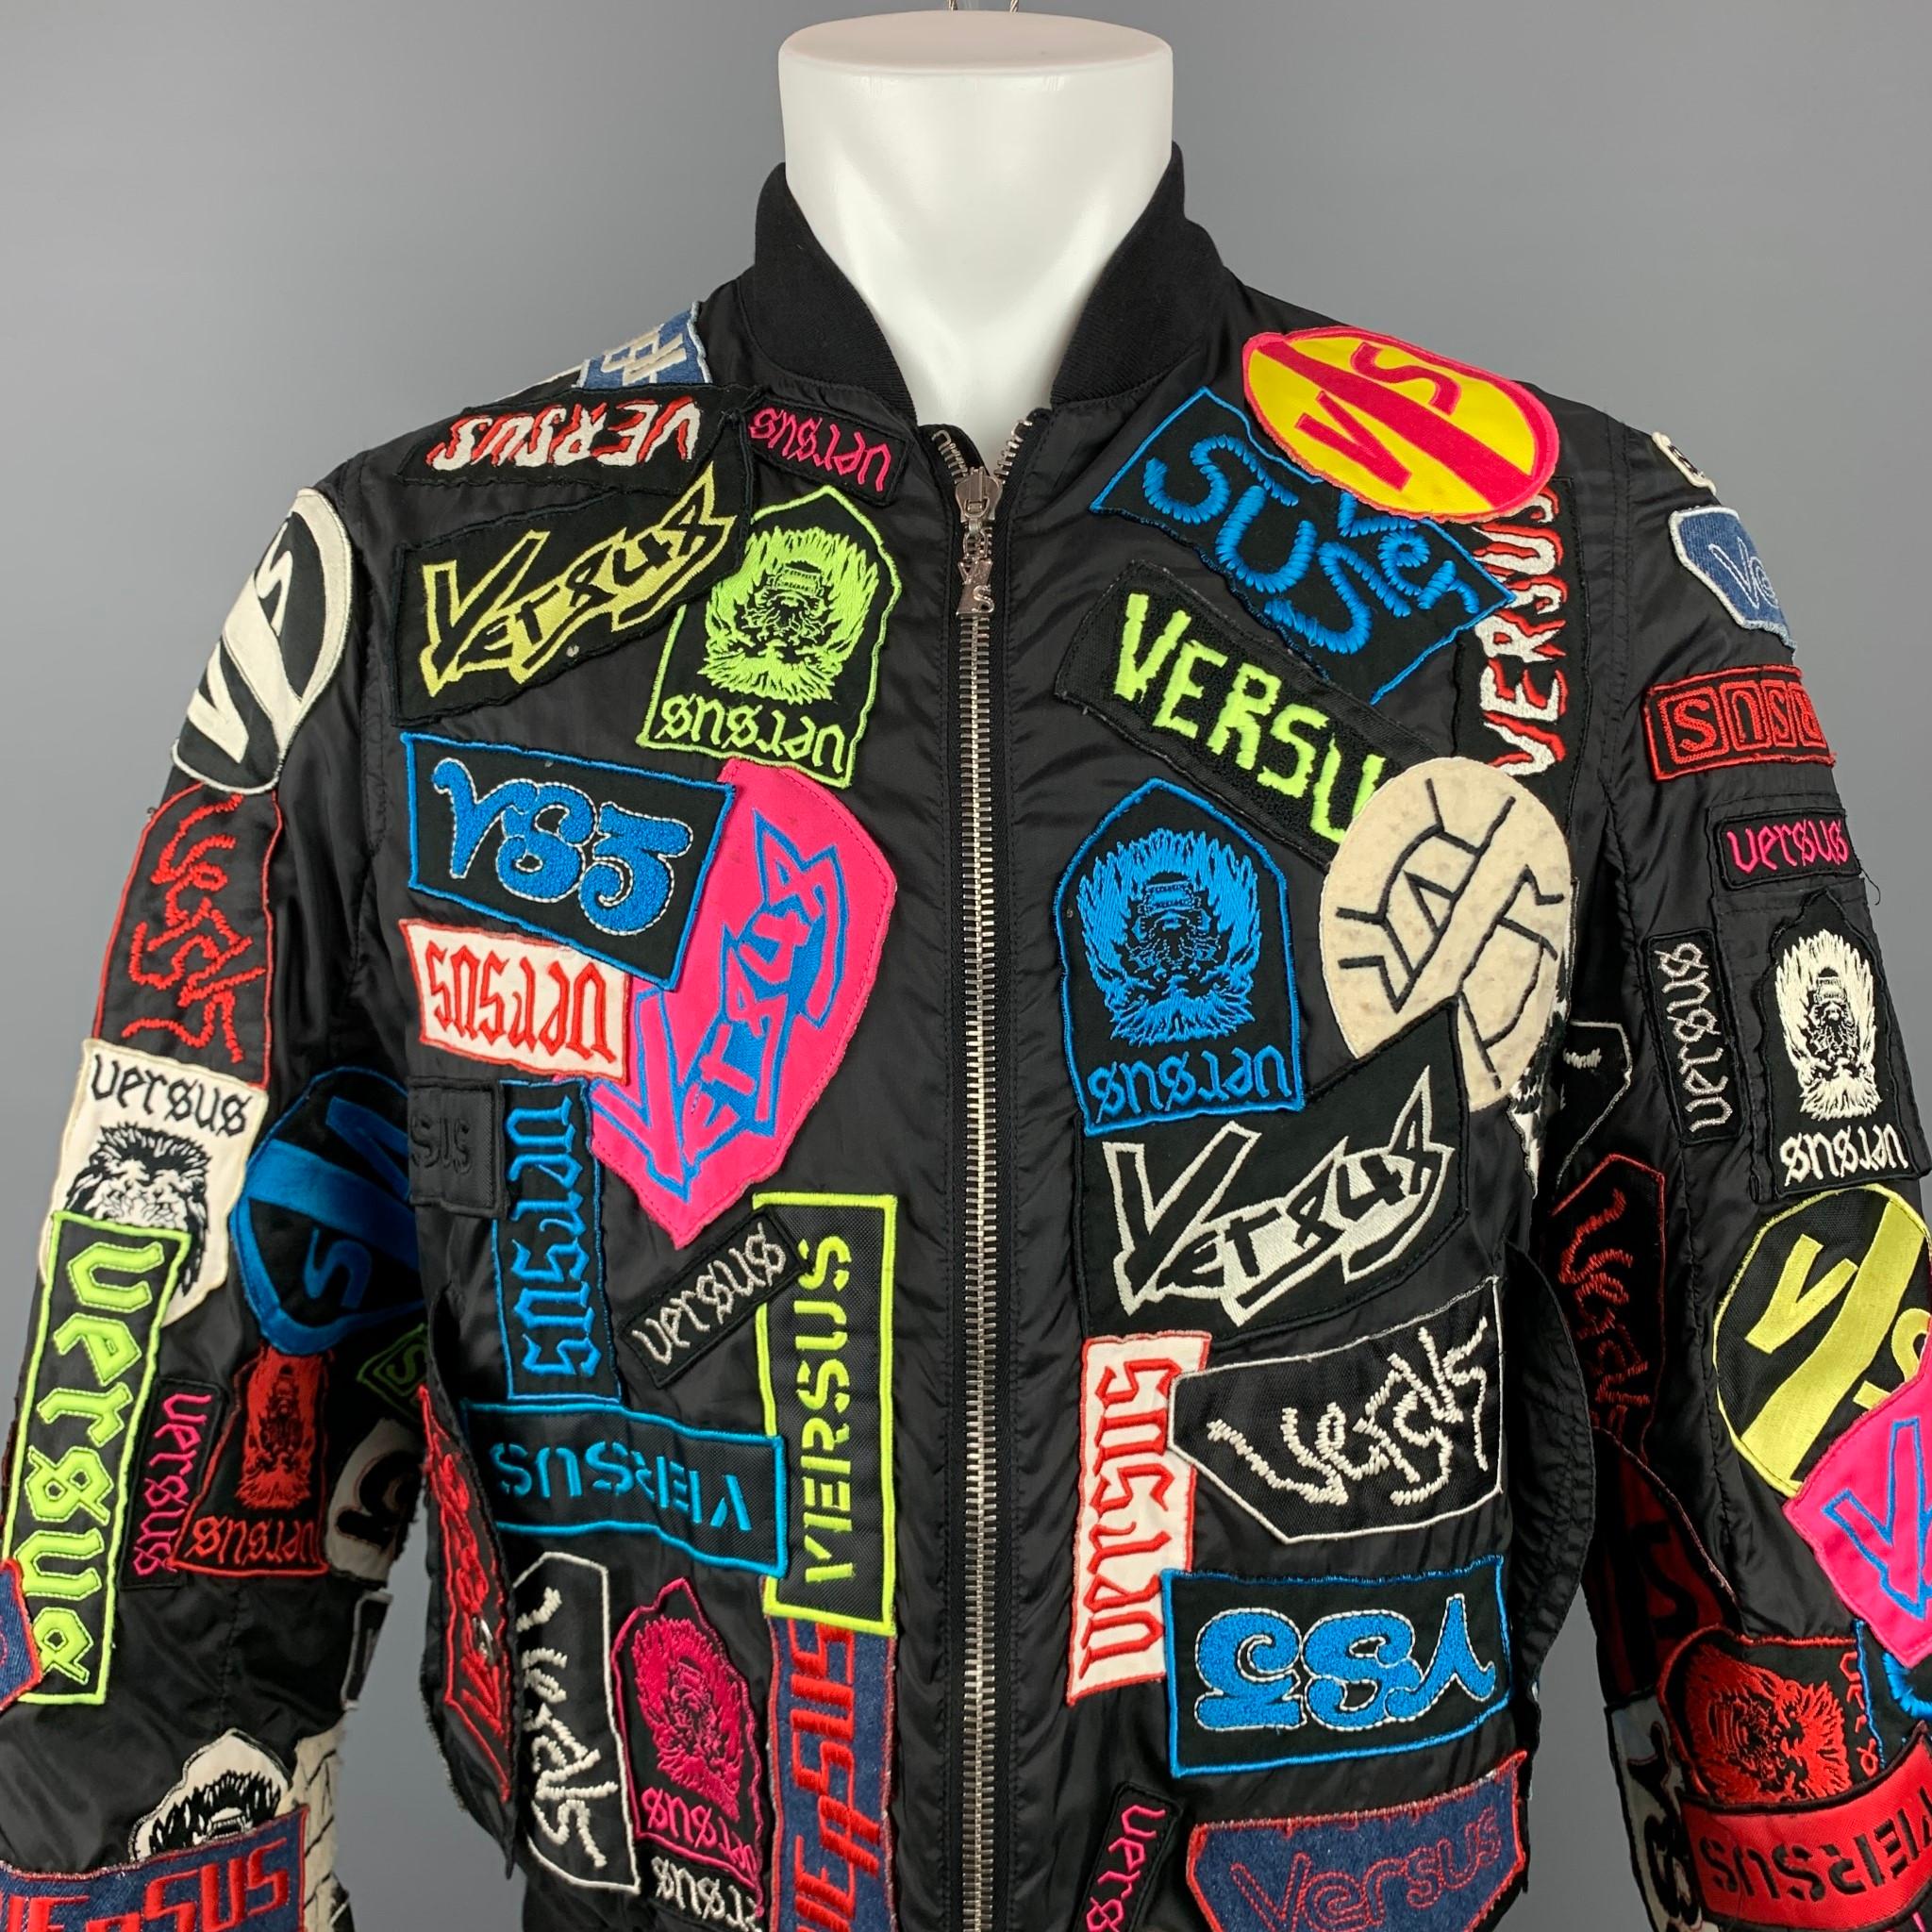 VERSUS by GIANNI VERSACE jacket come in a multi-color nylon with patch details throughout featuring a bomber style, flap pockets, and a full zip up closure. Made in Italy.

Very Good Pre-Owned Condition. Minor wear on patches.
Marked: